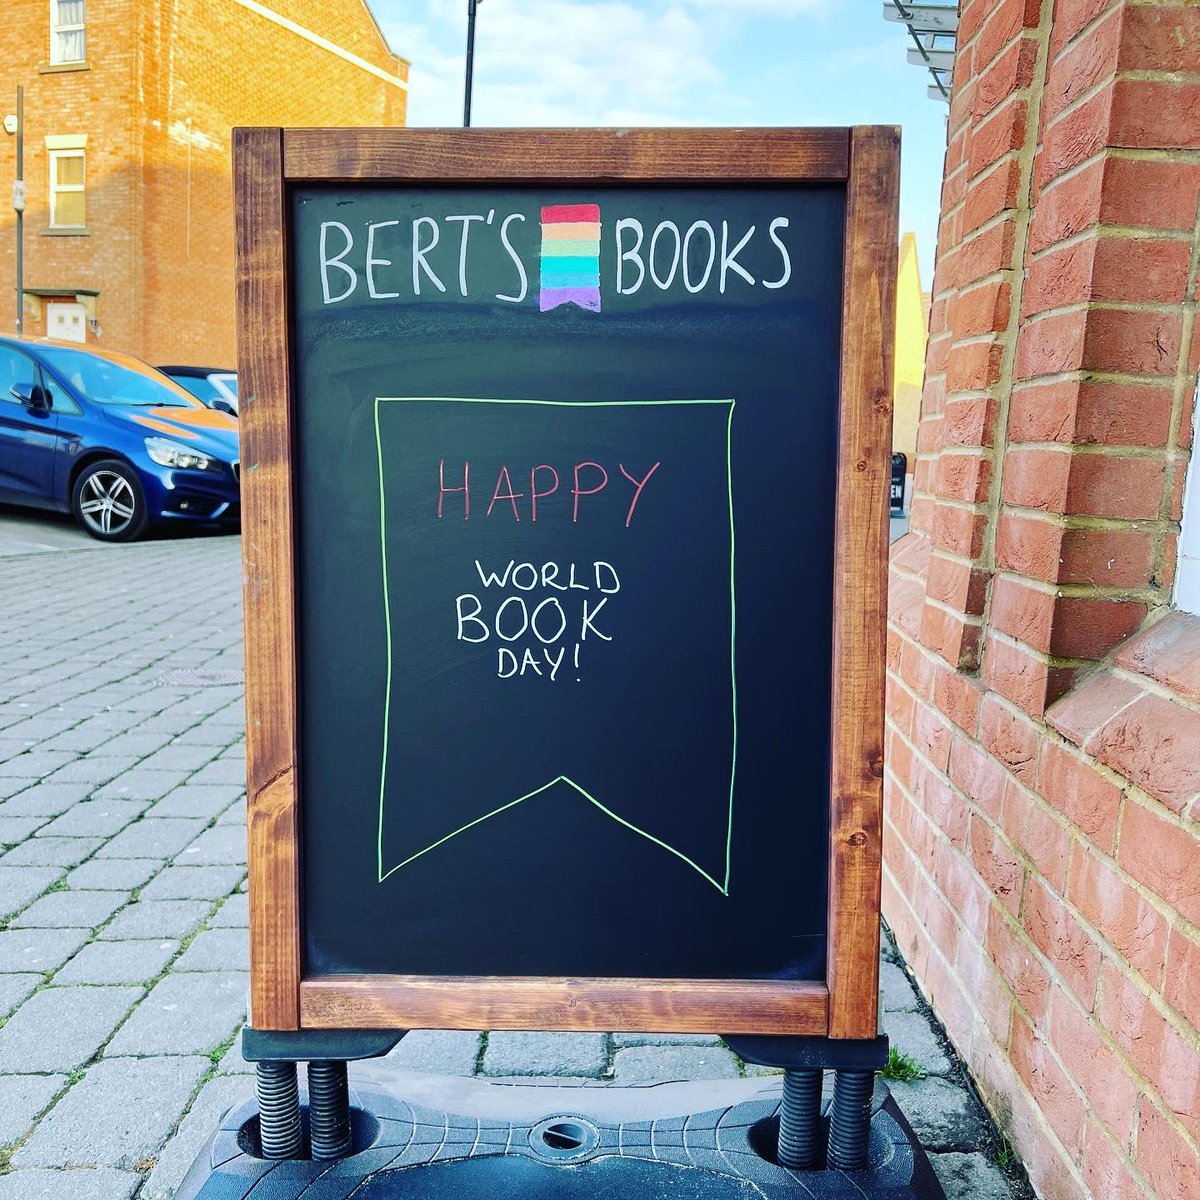 Happy World Book Day! Every child gets a £1 voucher to spend, but I don’t think they should have all the fun.

Use code WBD23 to get £1 off any purchase at bertsbooks.co.uk